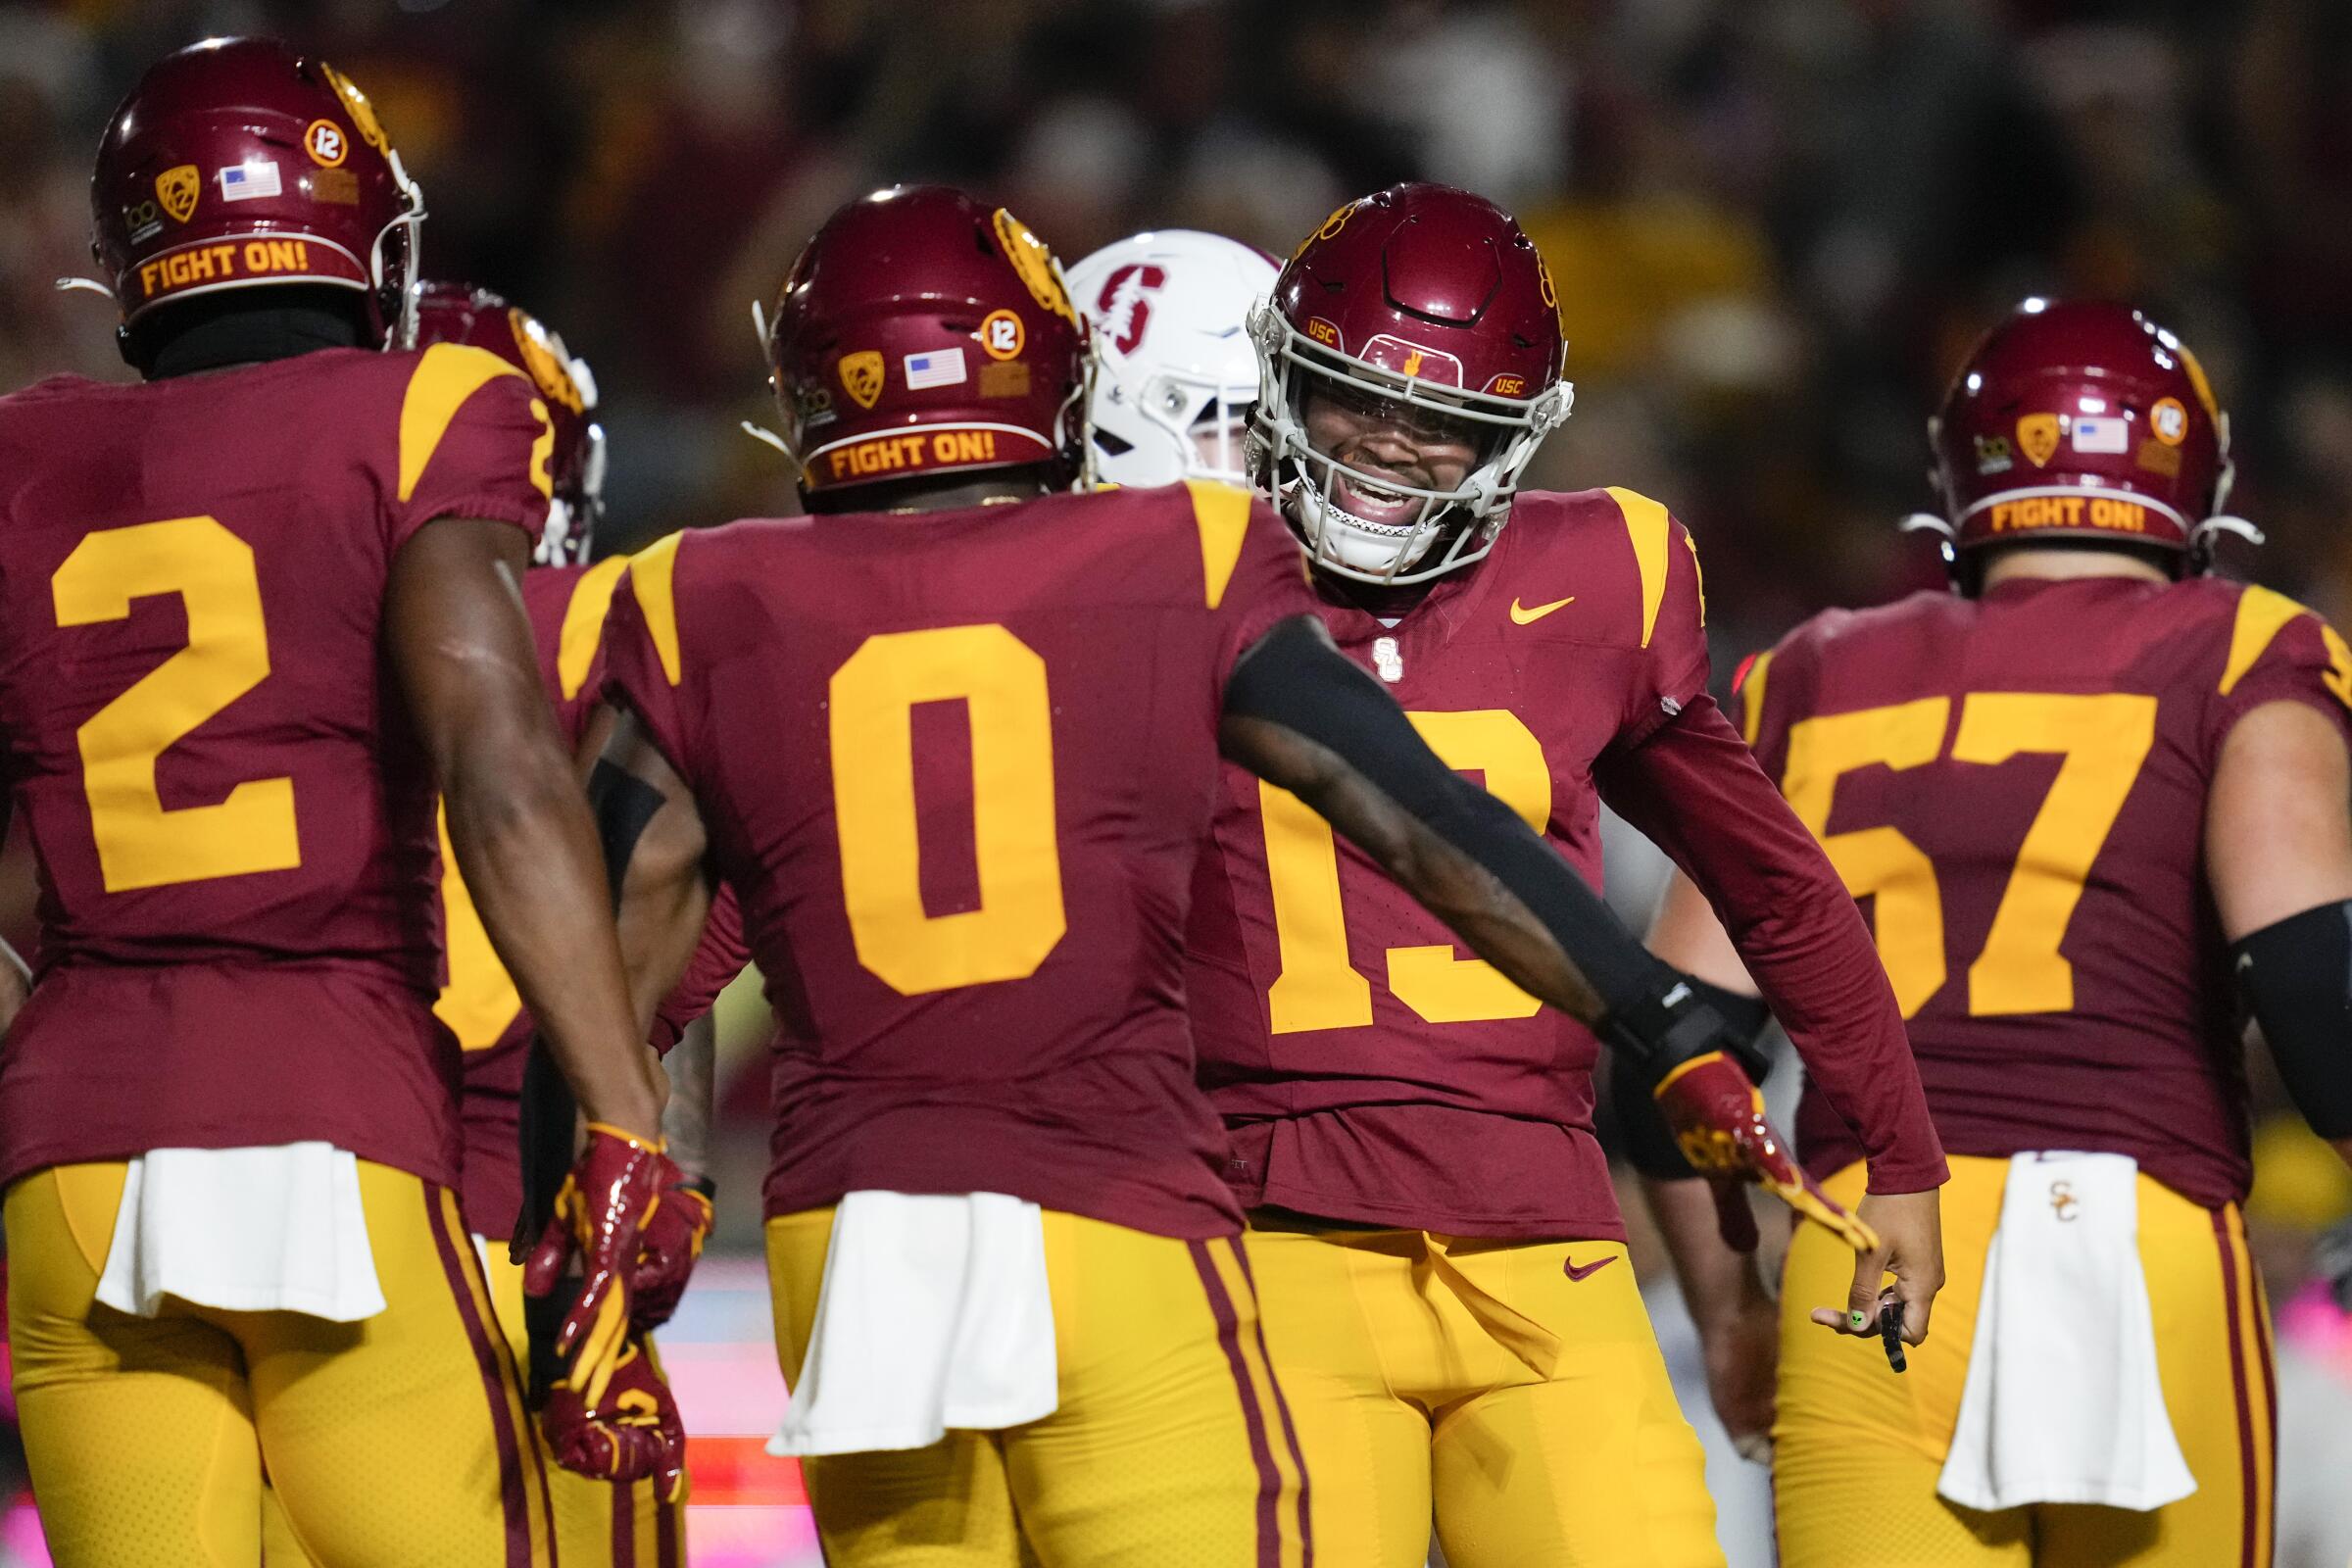 USC running back MarShawn Lloyd celebrates with quarterback Caleb Williams after scoring a touchdown.